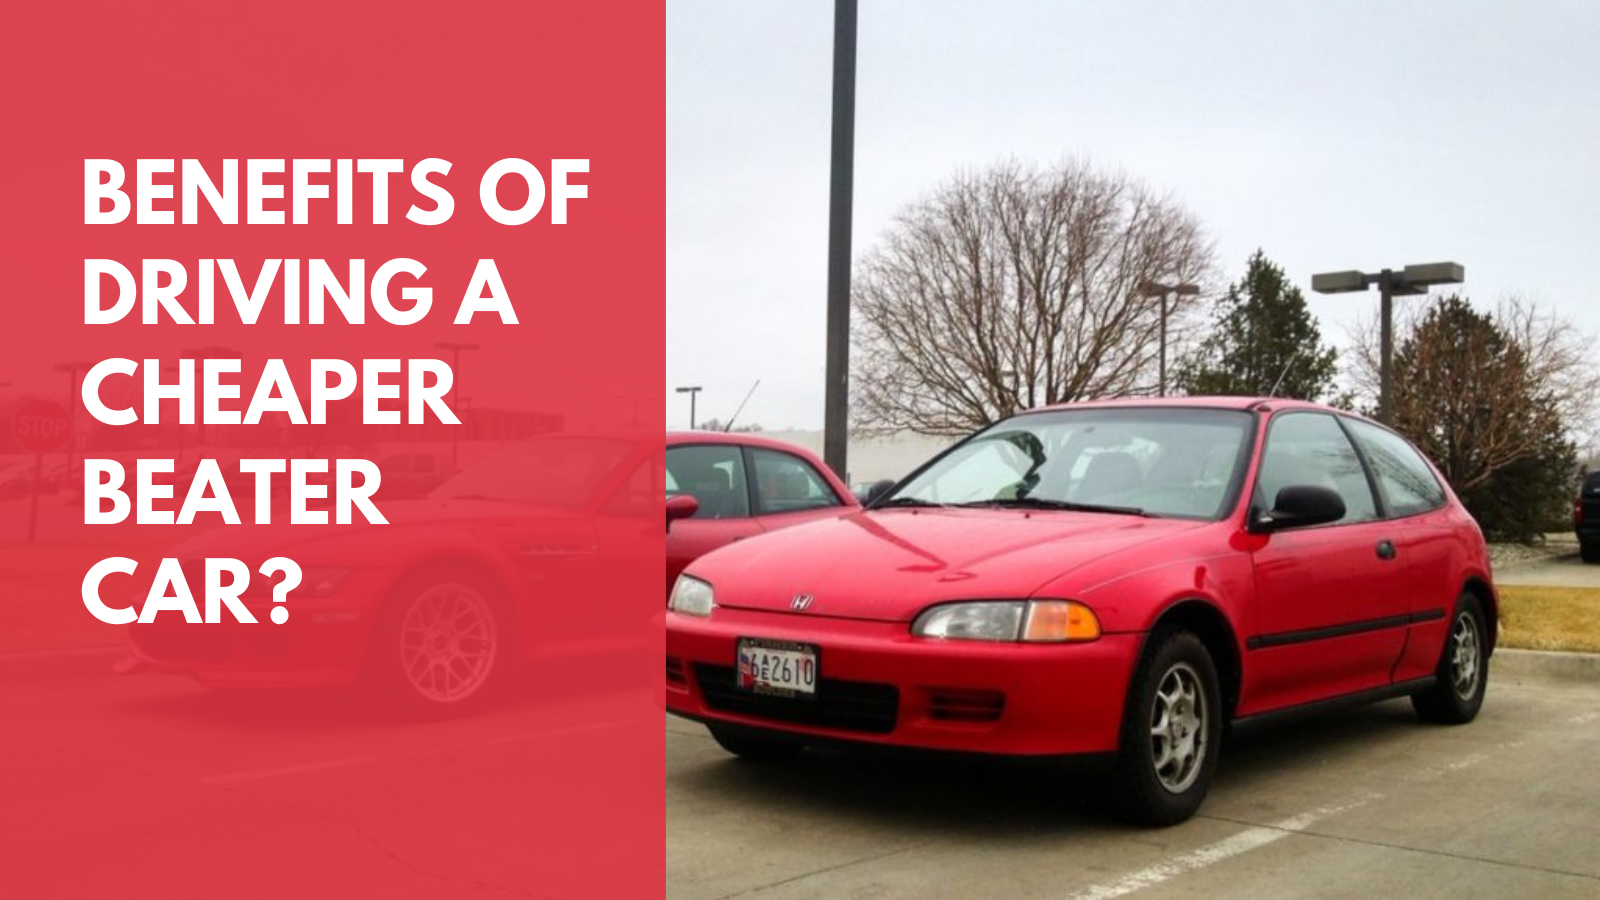 Benefits of Driving a Cheaper Beater Car?